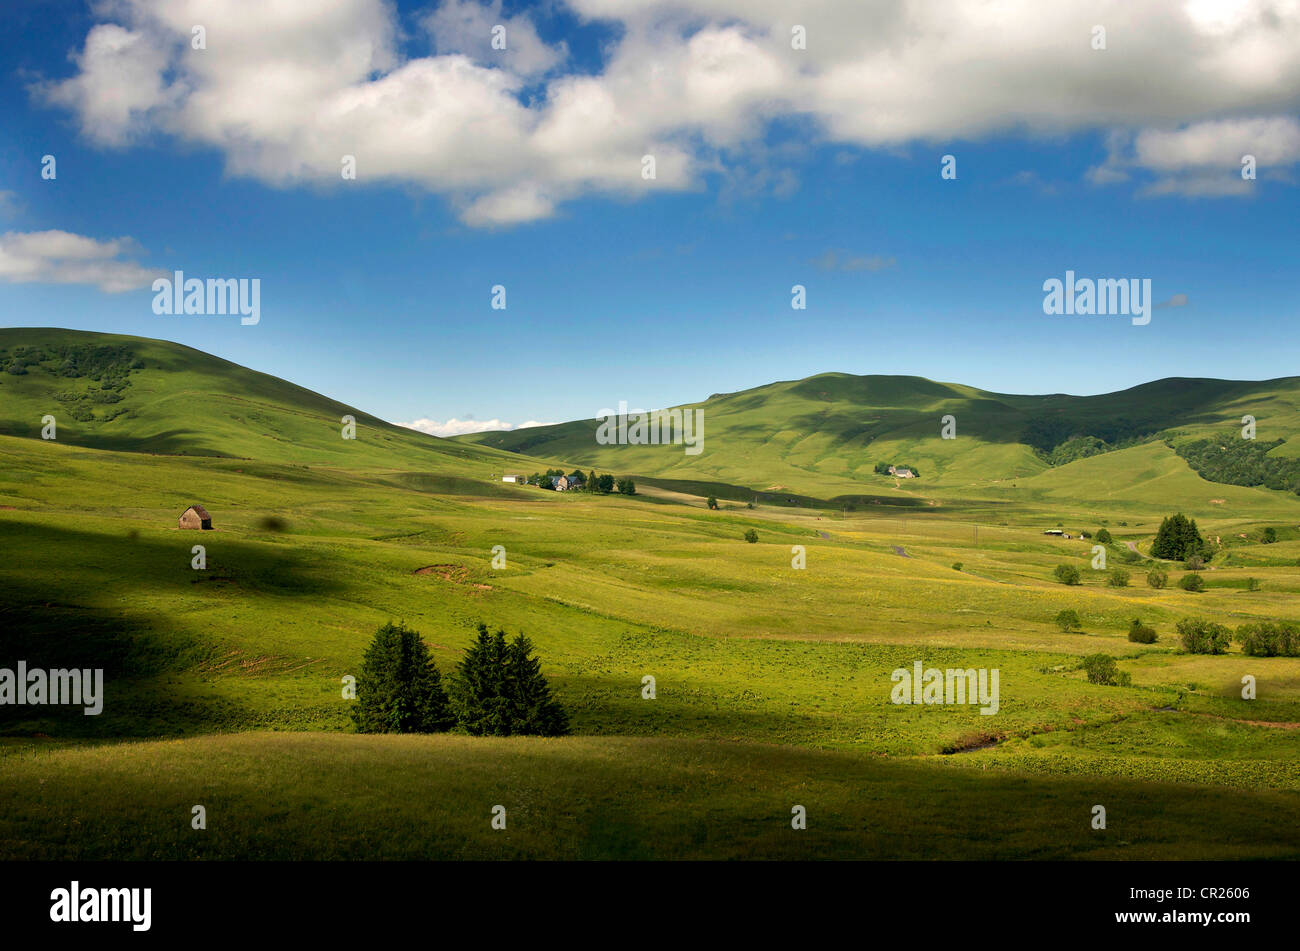 Scenic landscape of meadows and rolling hills of Cezallier, Auvergne, France, Europe Stock Photo